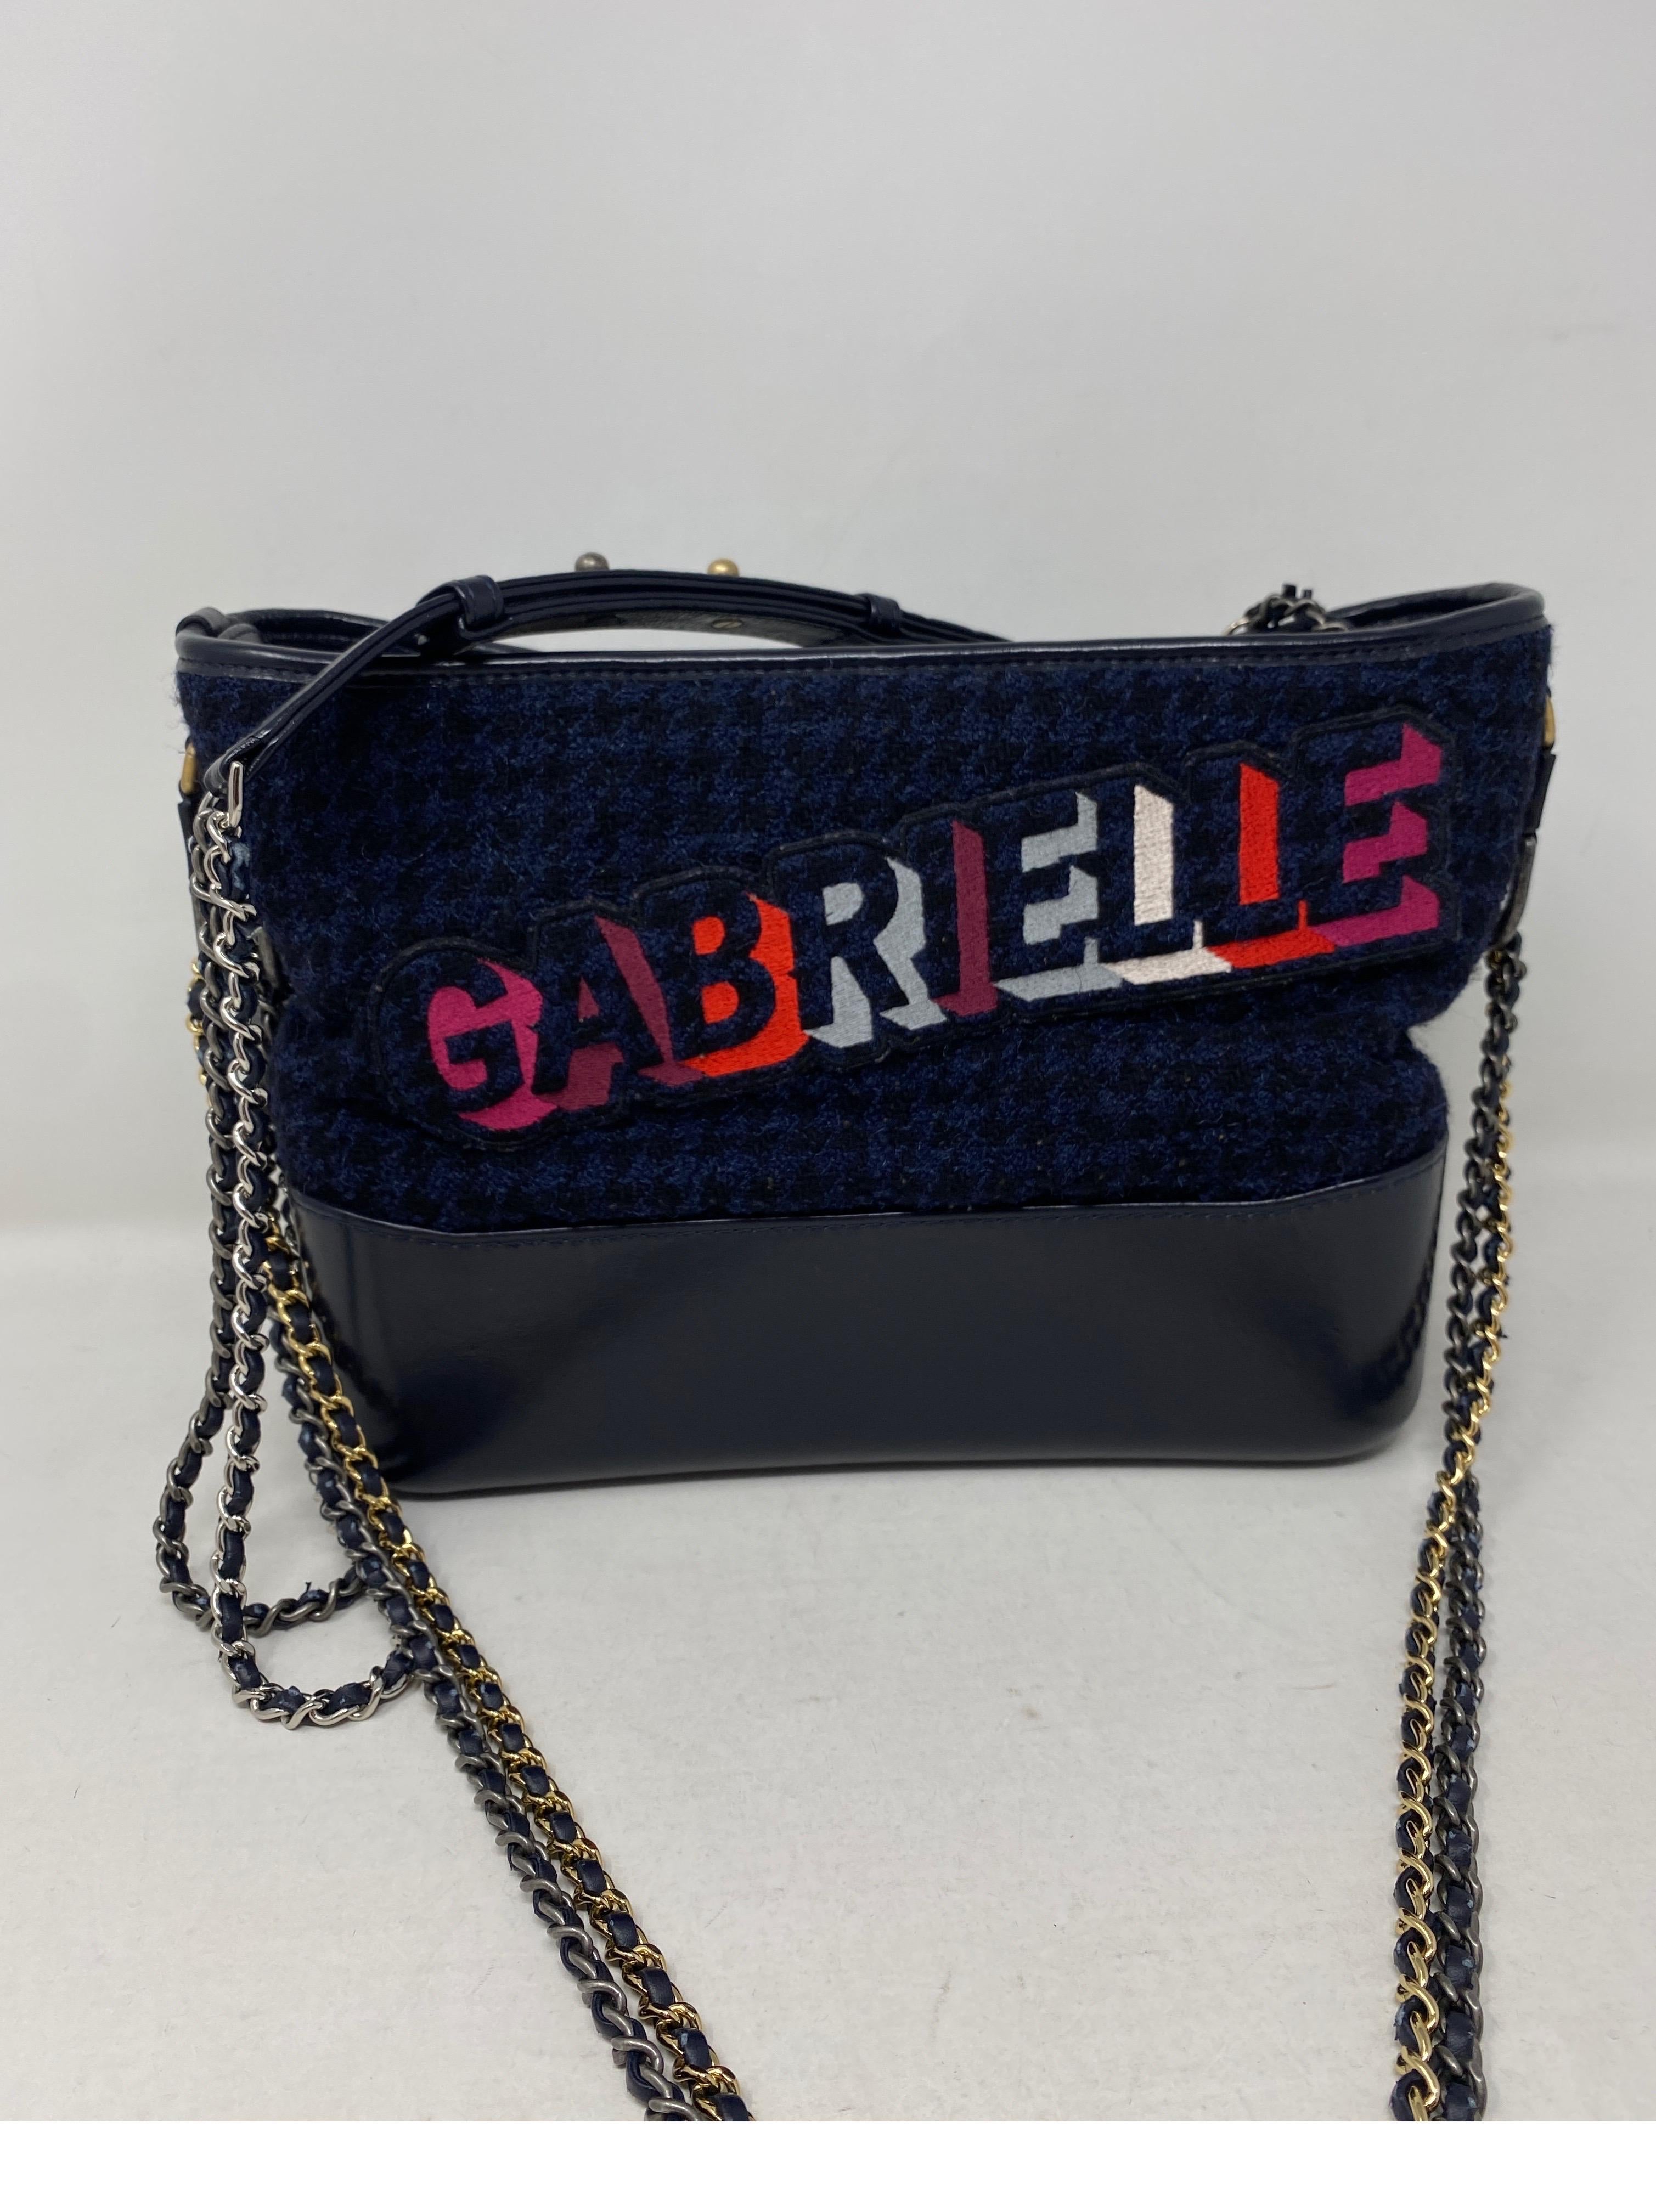 Chanel Gabrielle Crossbody Bag. Gabrielle letters over navy tweed fabric. Leather trim and two tone chains. Mint like new condition. Rare and limited bag. Unique collector's piece. Don't miss out on this one. Guaranteed authentic. 